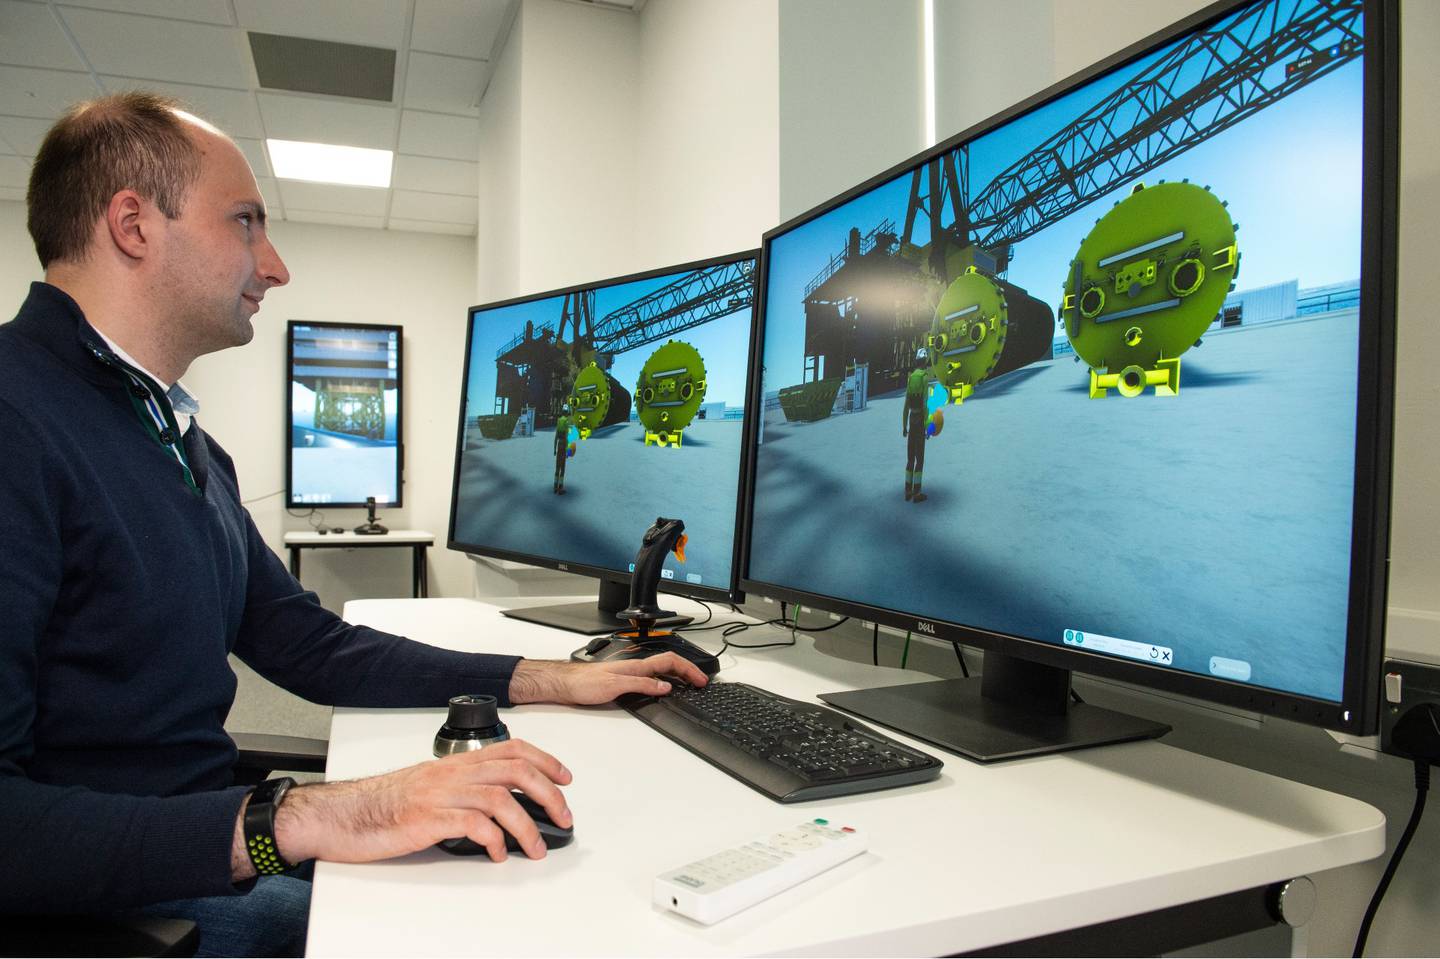 The University of Aberdeen and the Net Zero Technology Centre launched a £1.6m immersive simulation suite at the National Decommissioning Centre last month. Photo: University of Aberdeen